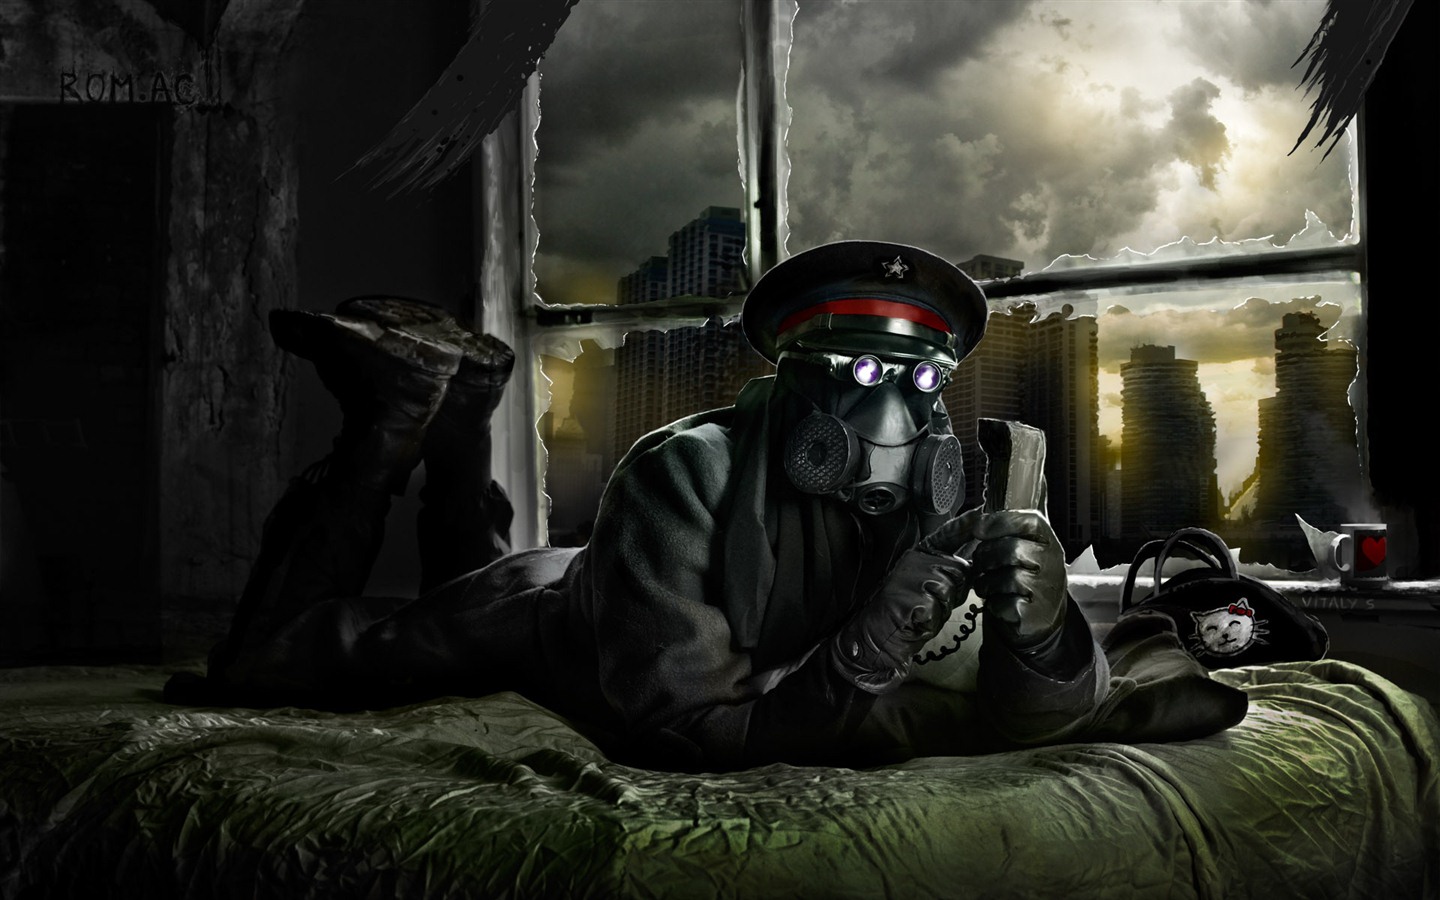 Romantically Apocalyptic creative painting wallpapers (2) #14 - 1440x900